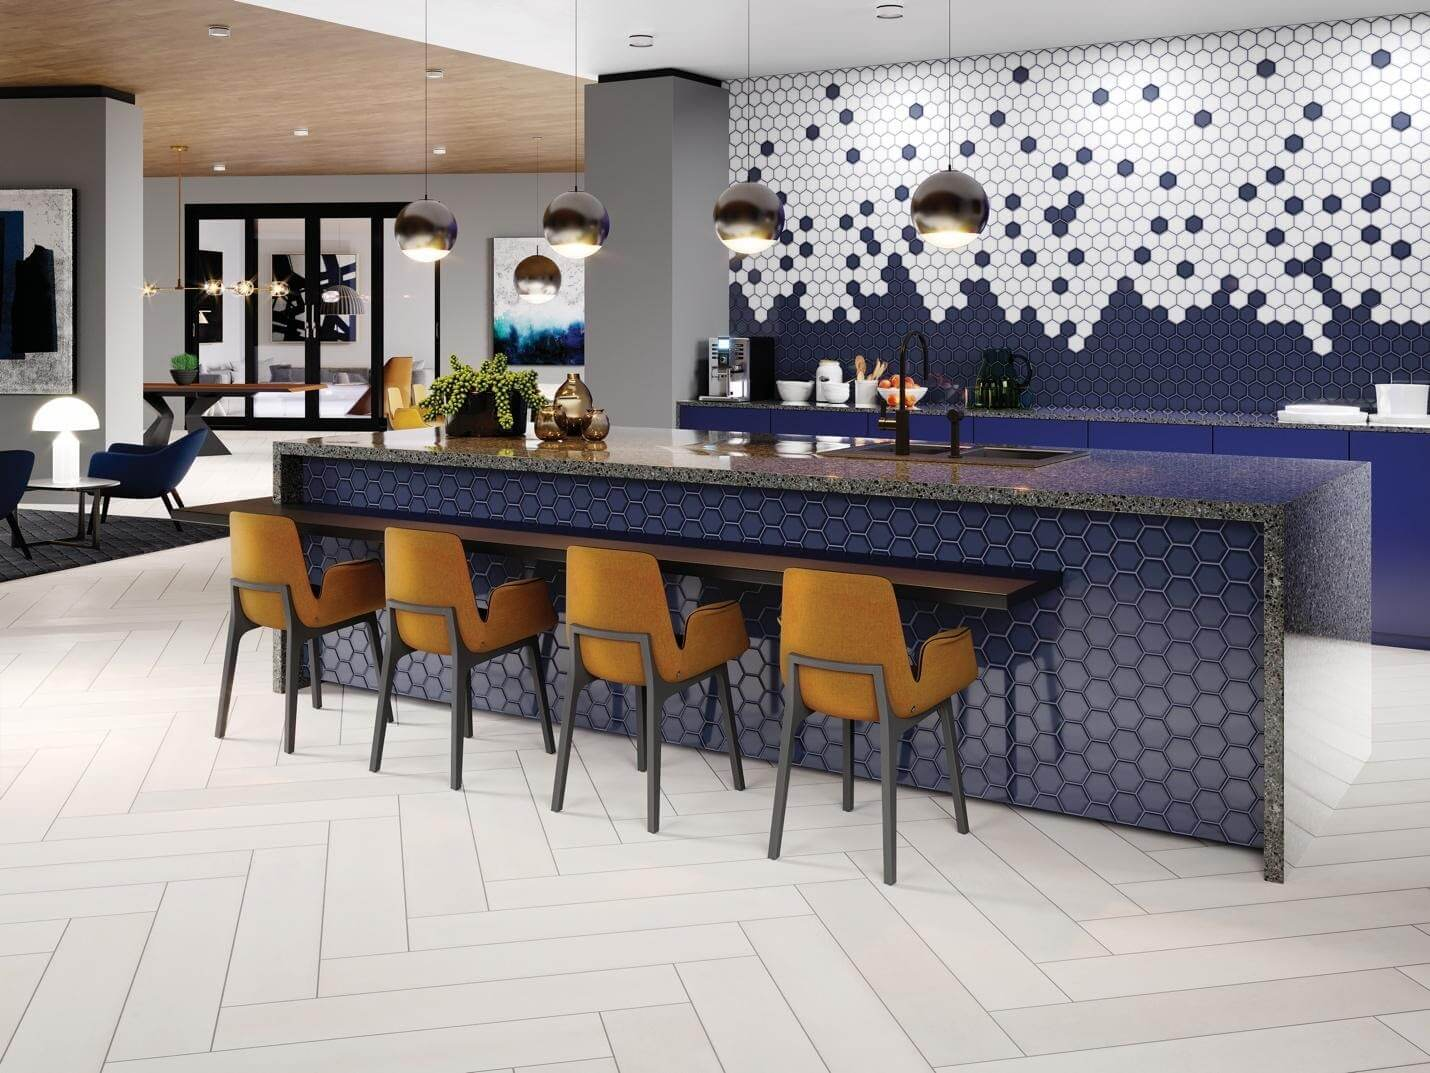 Top Terrazzo Tiles Trend You Should Look Out for In 2021